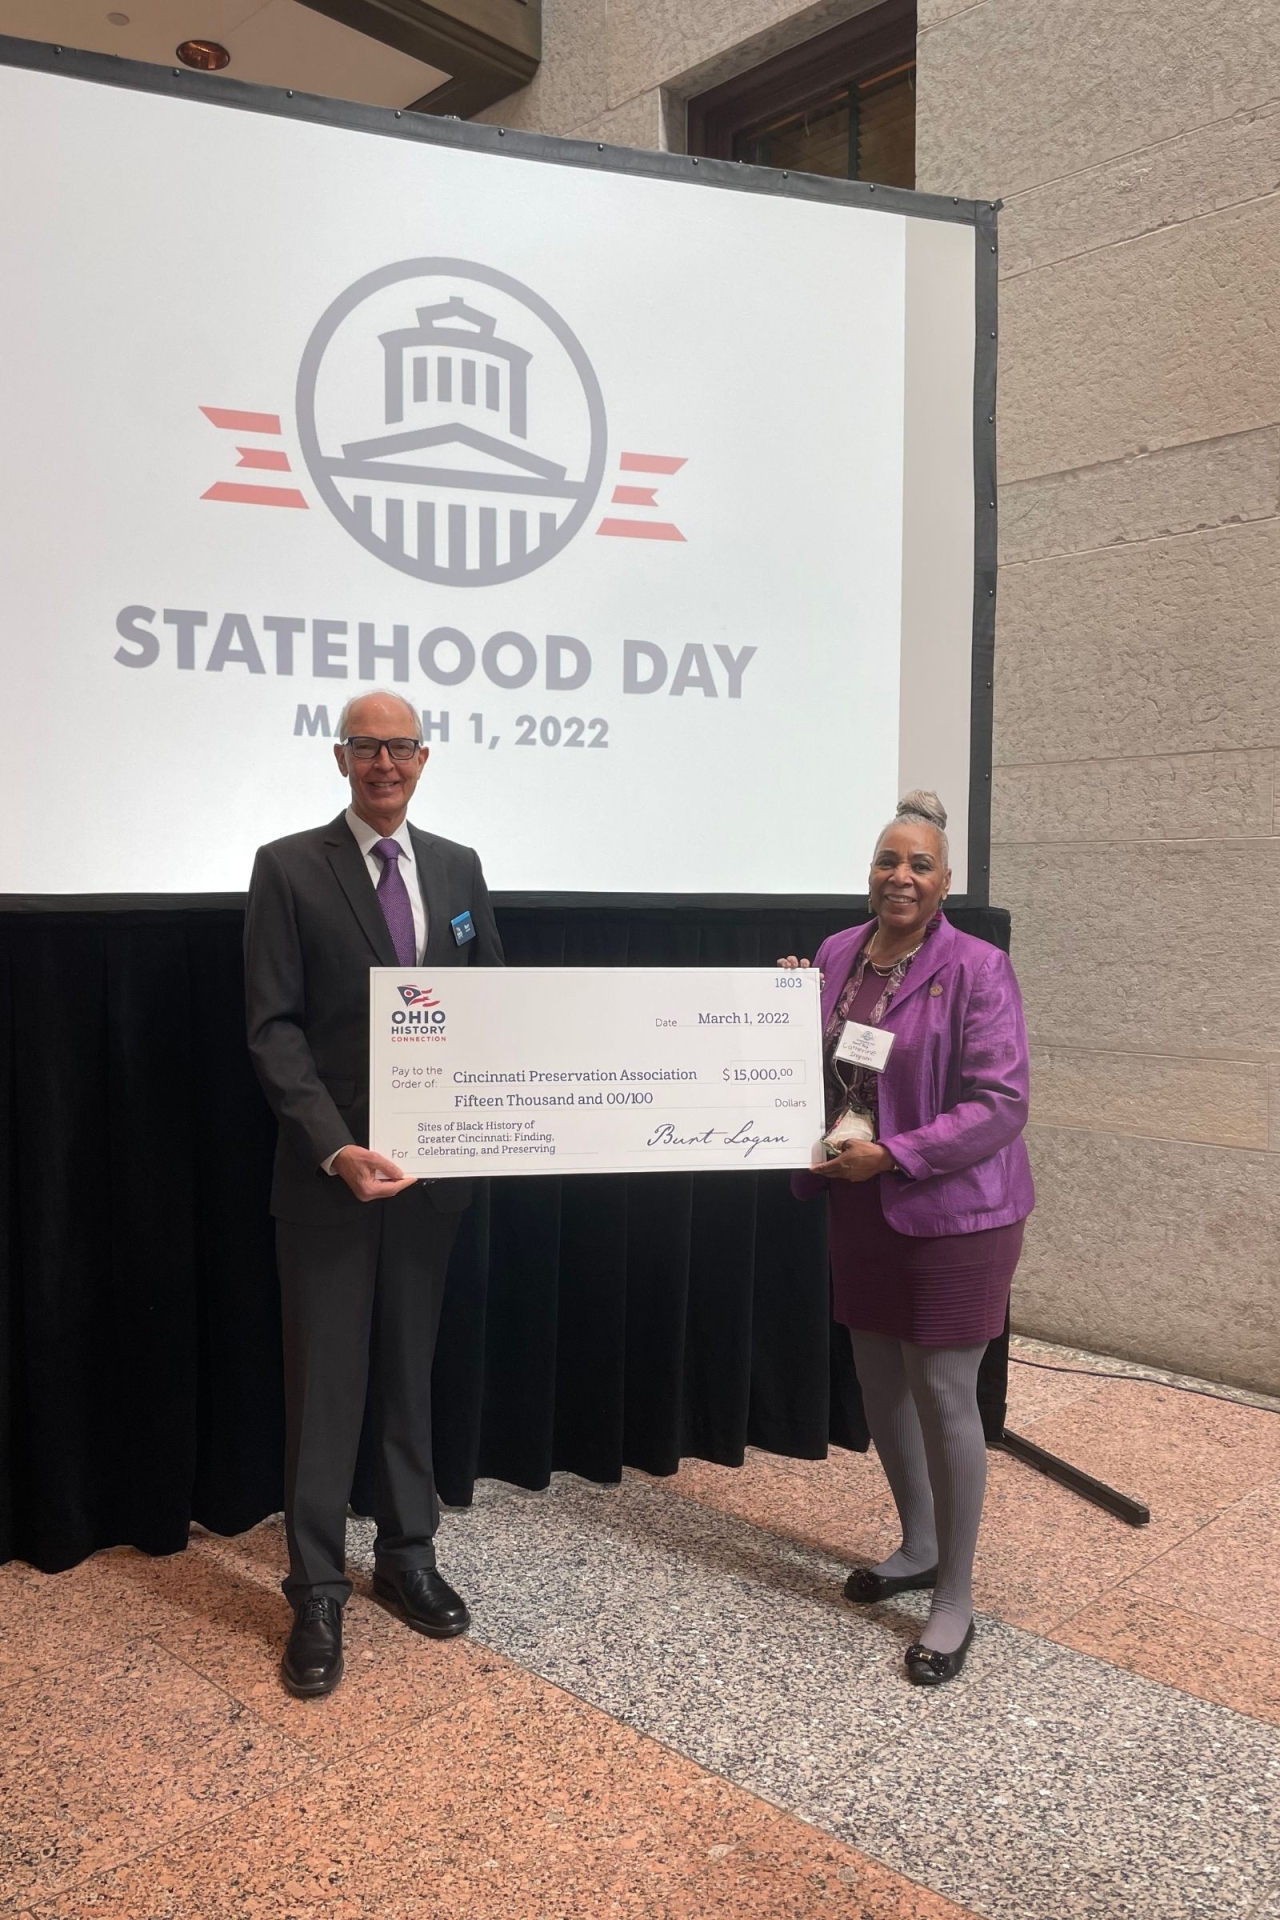 Rep Ingram and the Ohio History President at Statehood Day - She is pictured with the check for The Cincinnati Preservation Association, that was awarded an Ohio History Fund Grant.